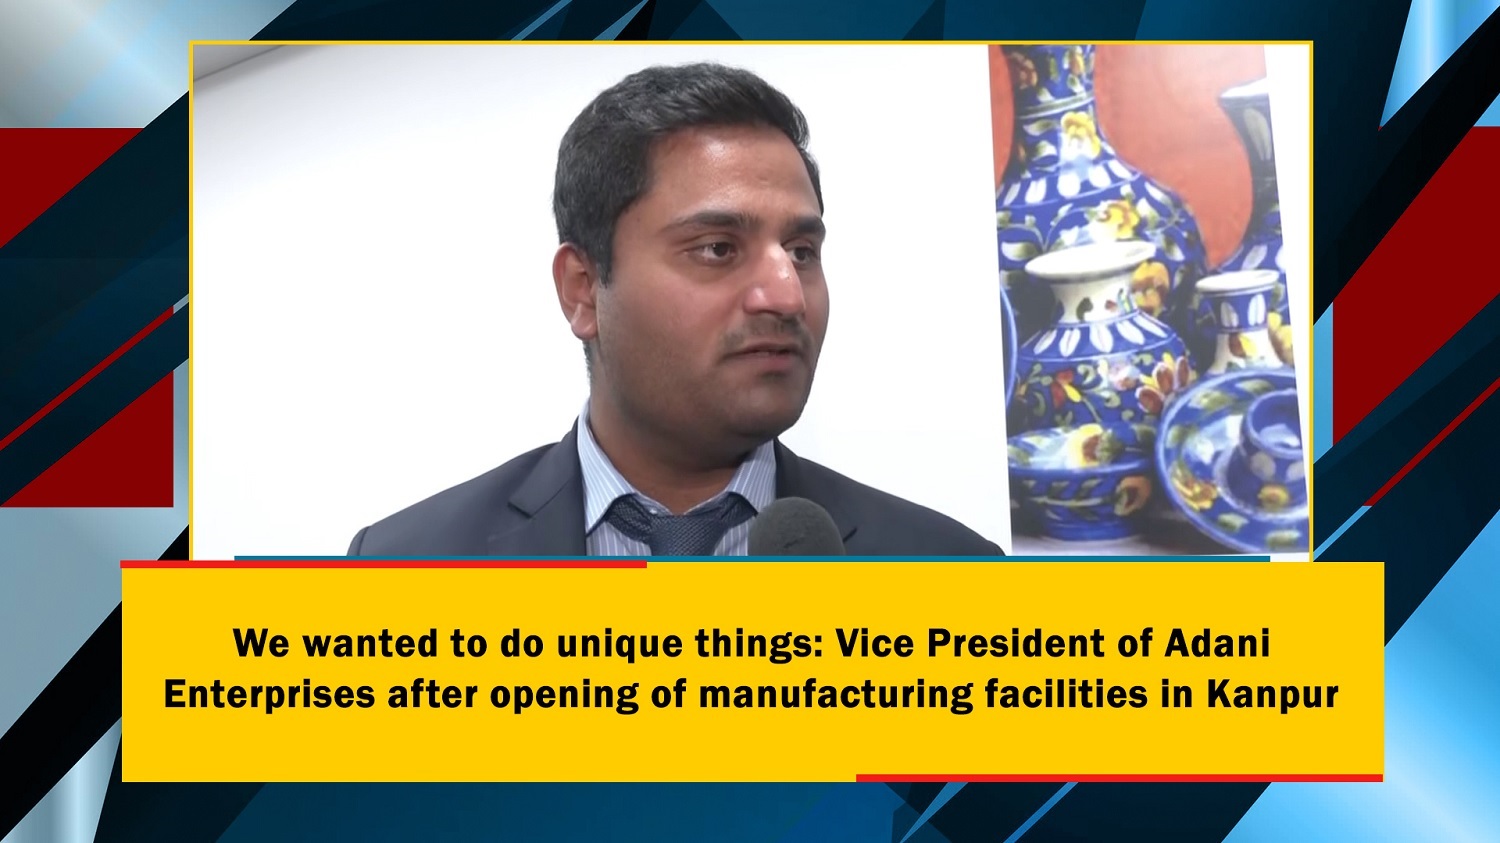 We wanted to do unique things` Vice President of Adani Enterprises after opening of manufacturing facilities in Kanpur